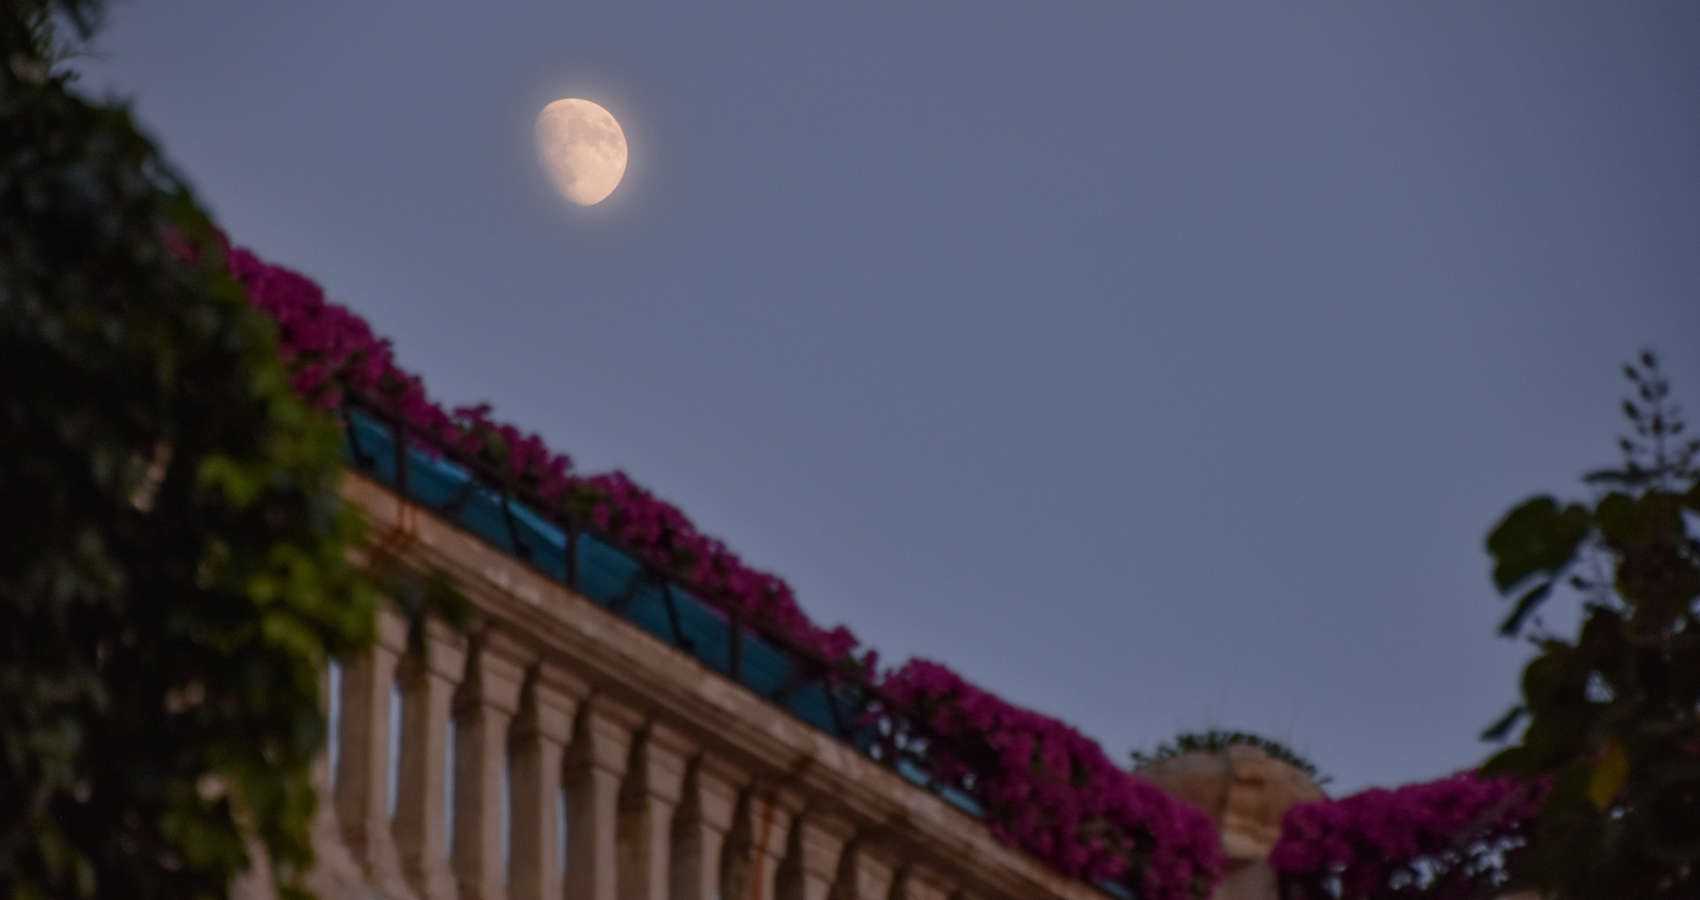 Gazing at The Moon From The Balcony, a poem by Walid Boureghda at Spillwords.com